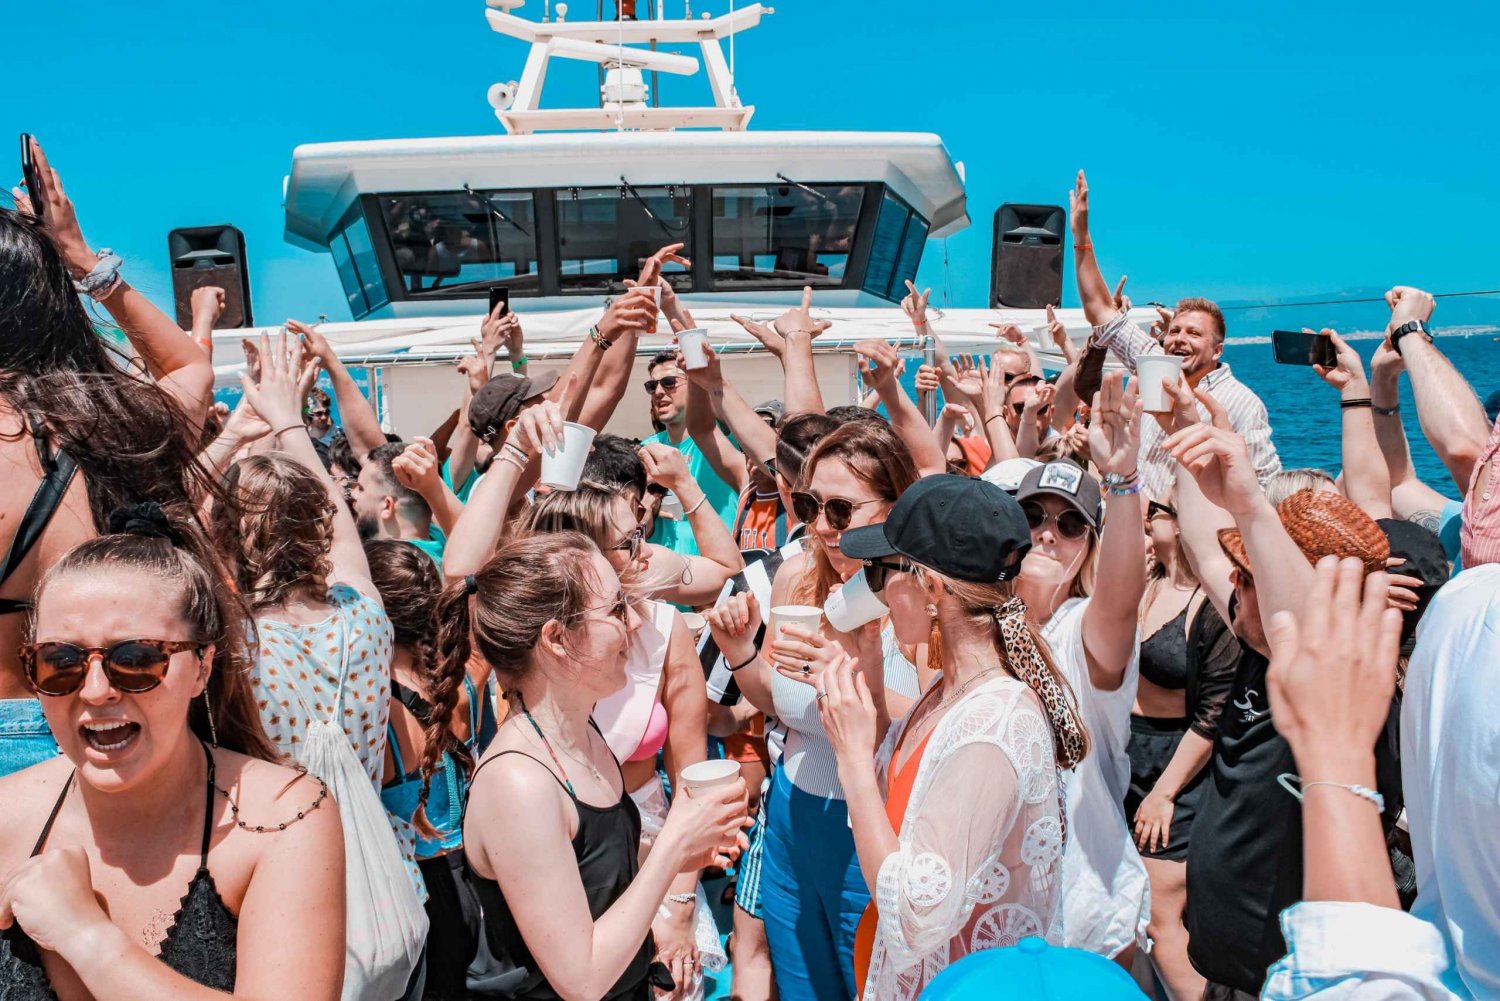 Mallorca: Boat Party with DJ, Buffet and Entertainment